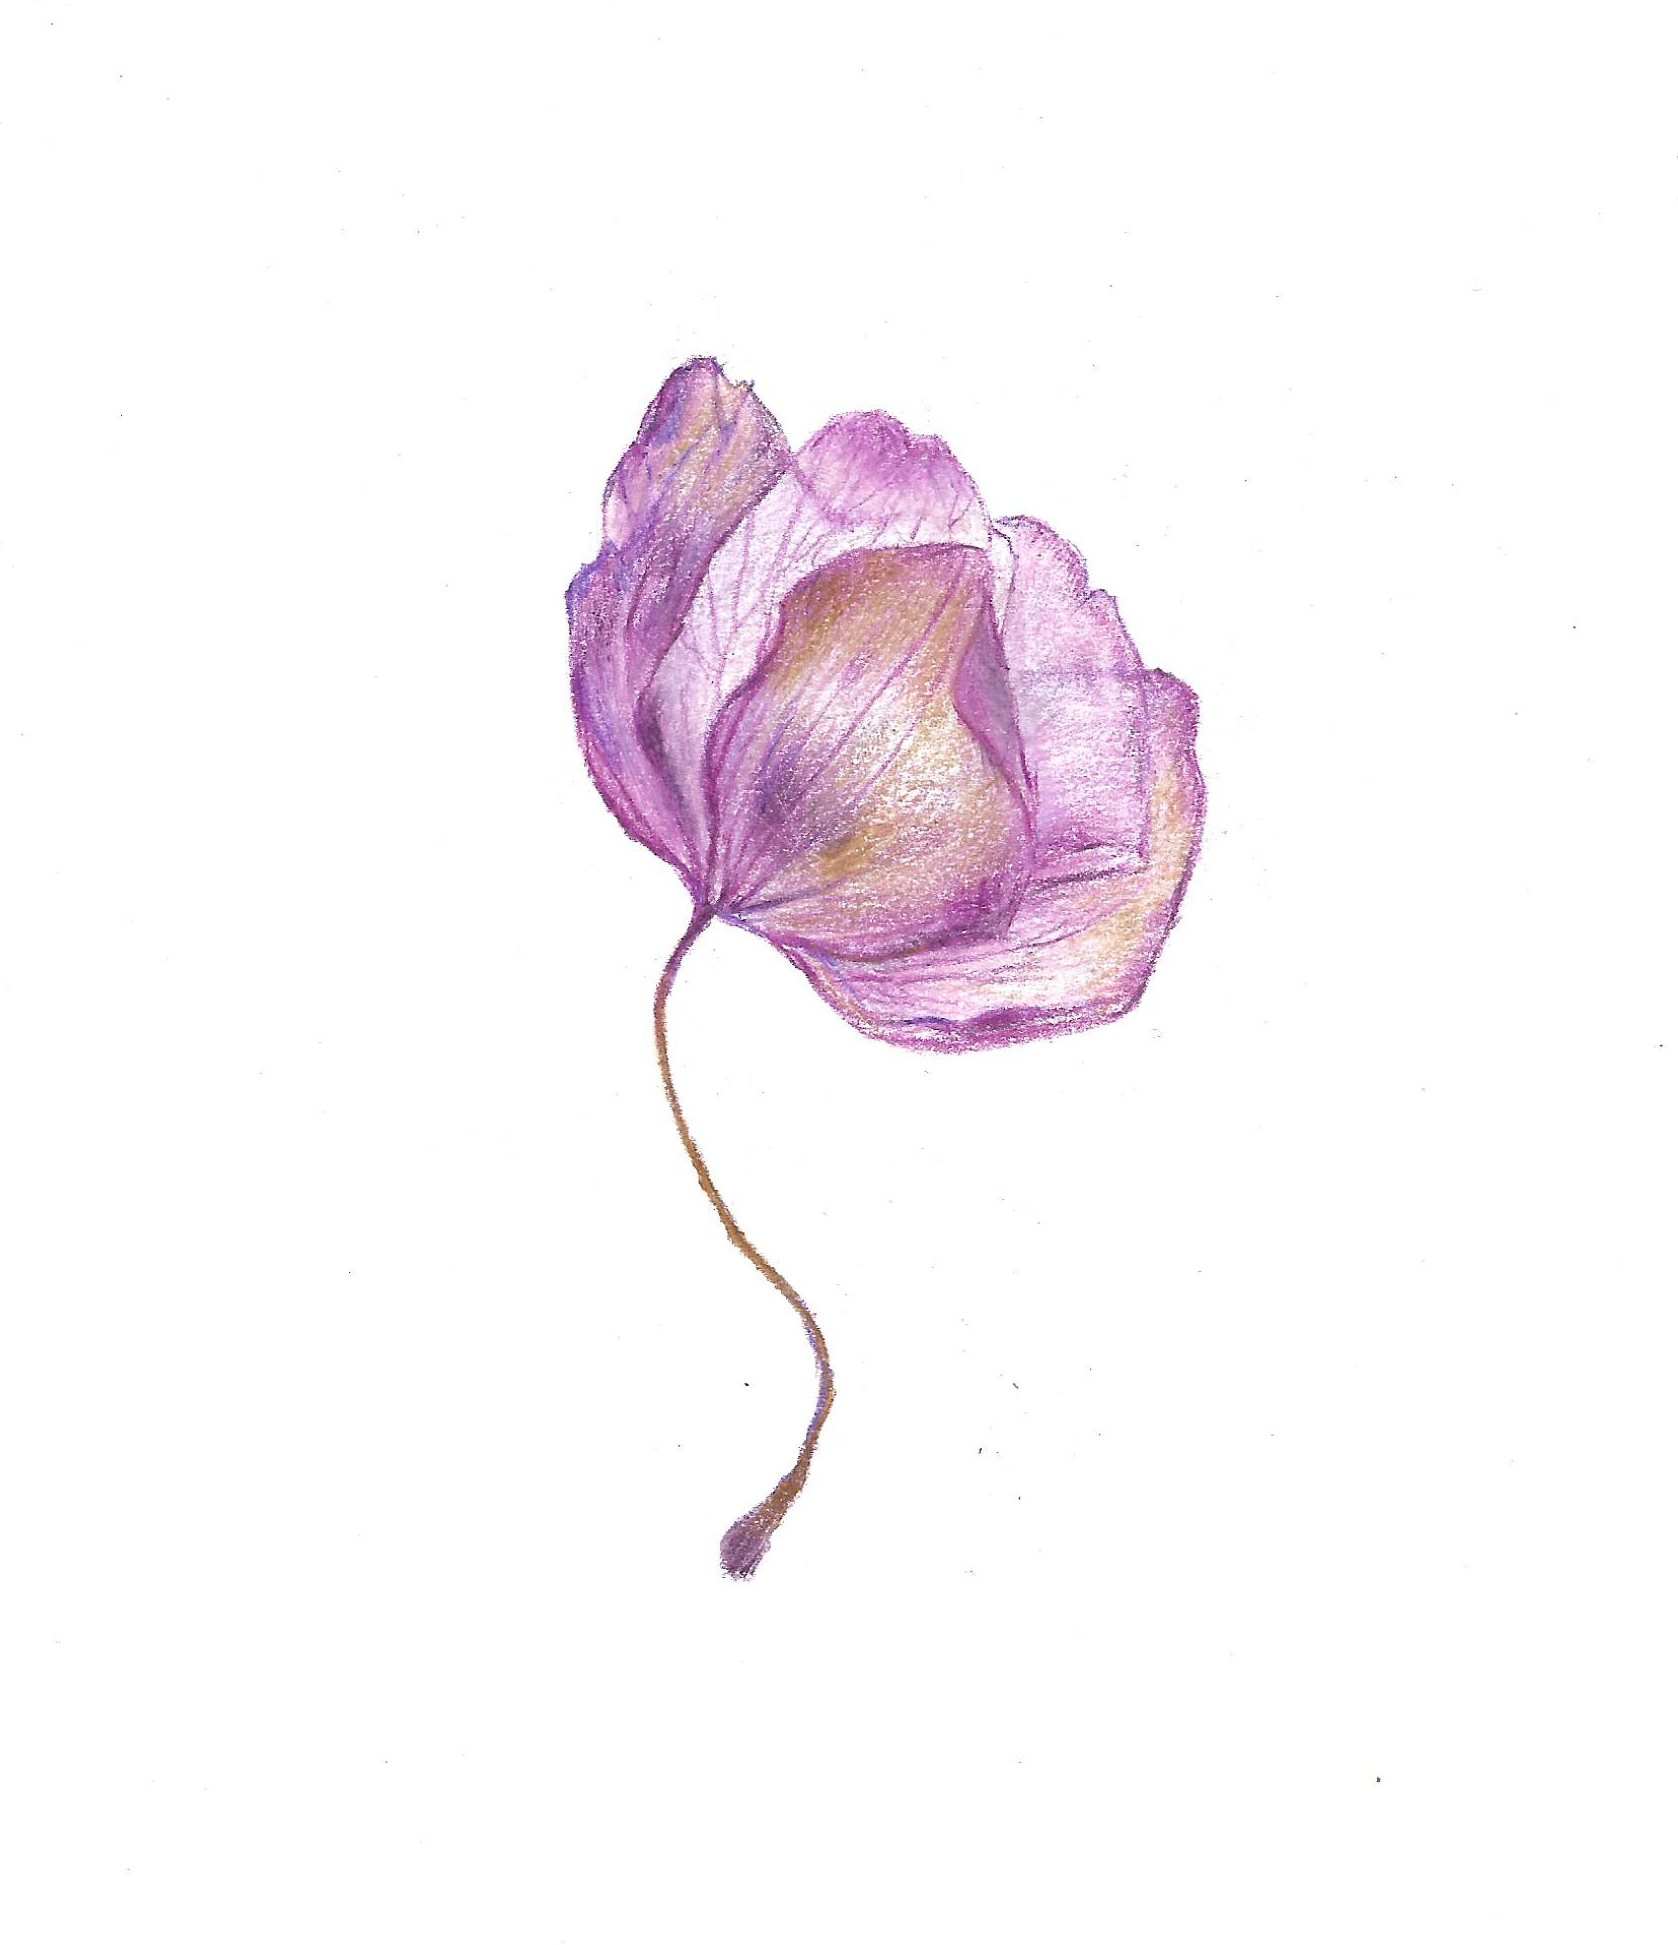 Drawing of completed antique pressed flower - browning pink and purple orchid.